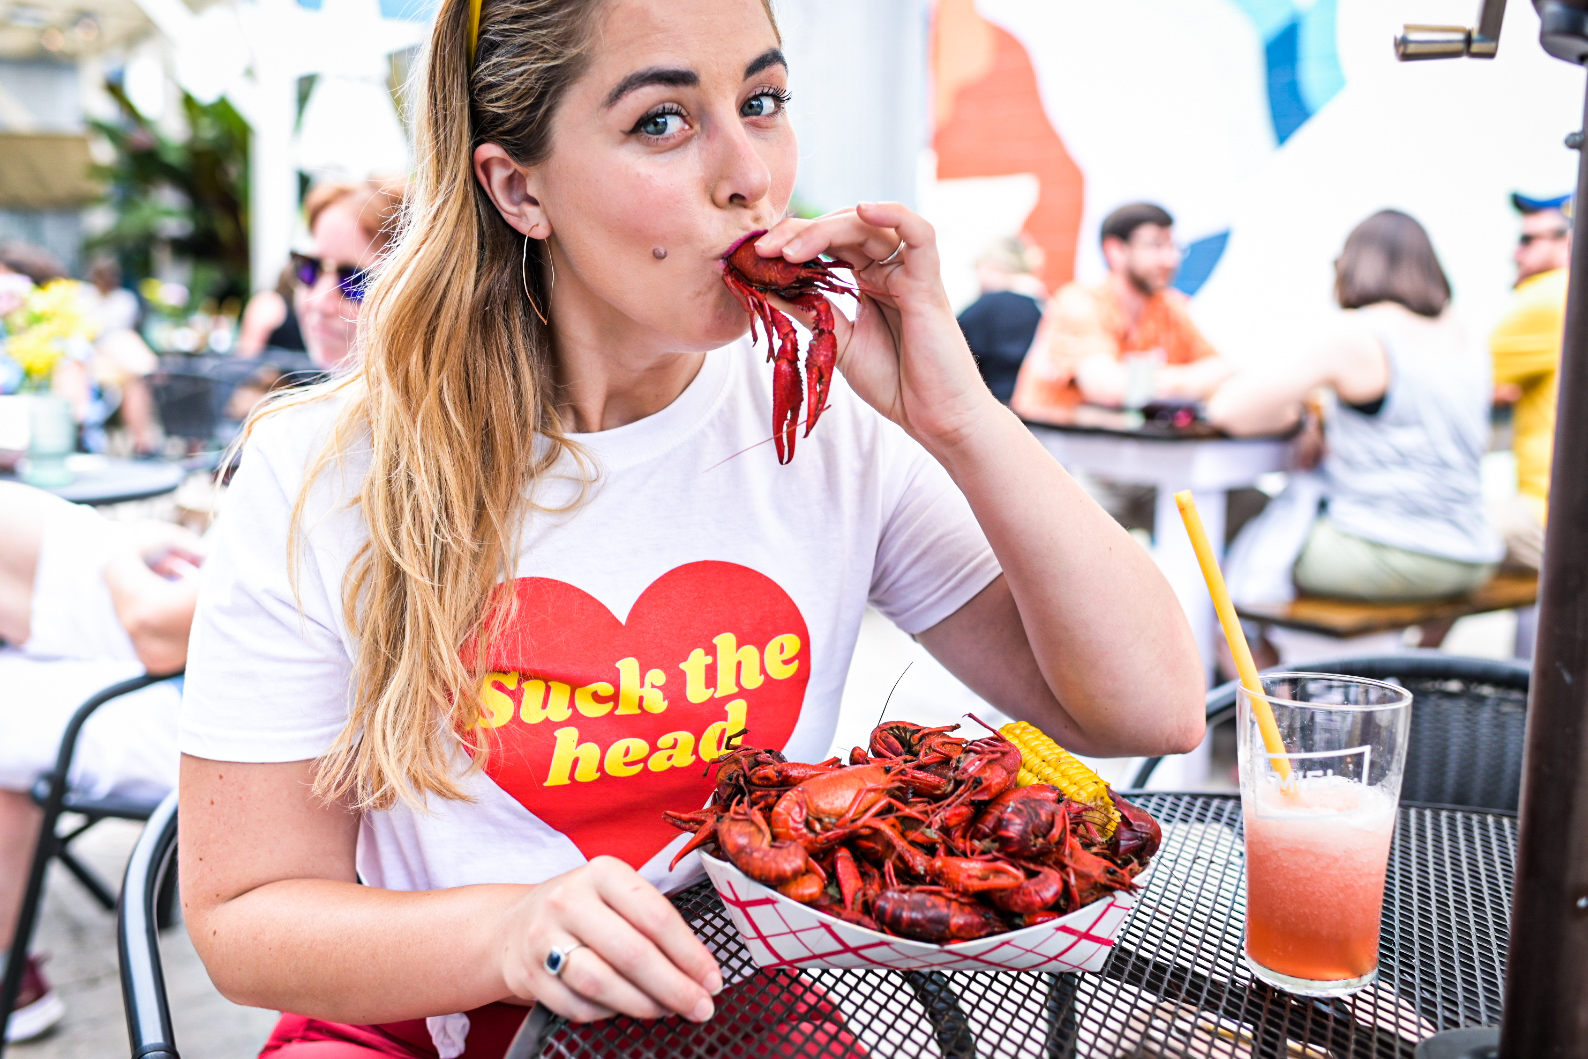 Rémy Robert sucks the head of a crawfish while modeling a t-shirt from Dee Taylor